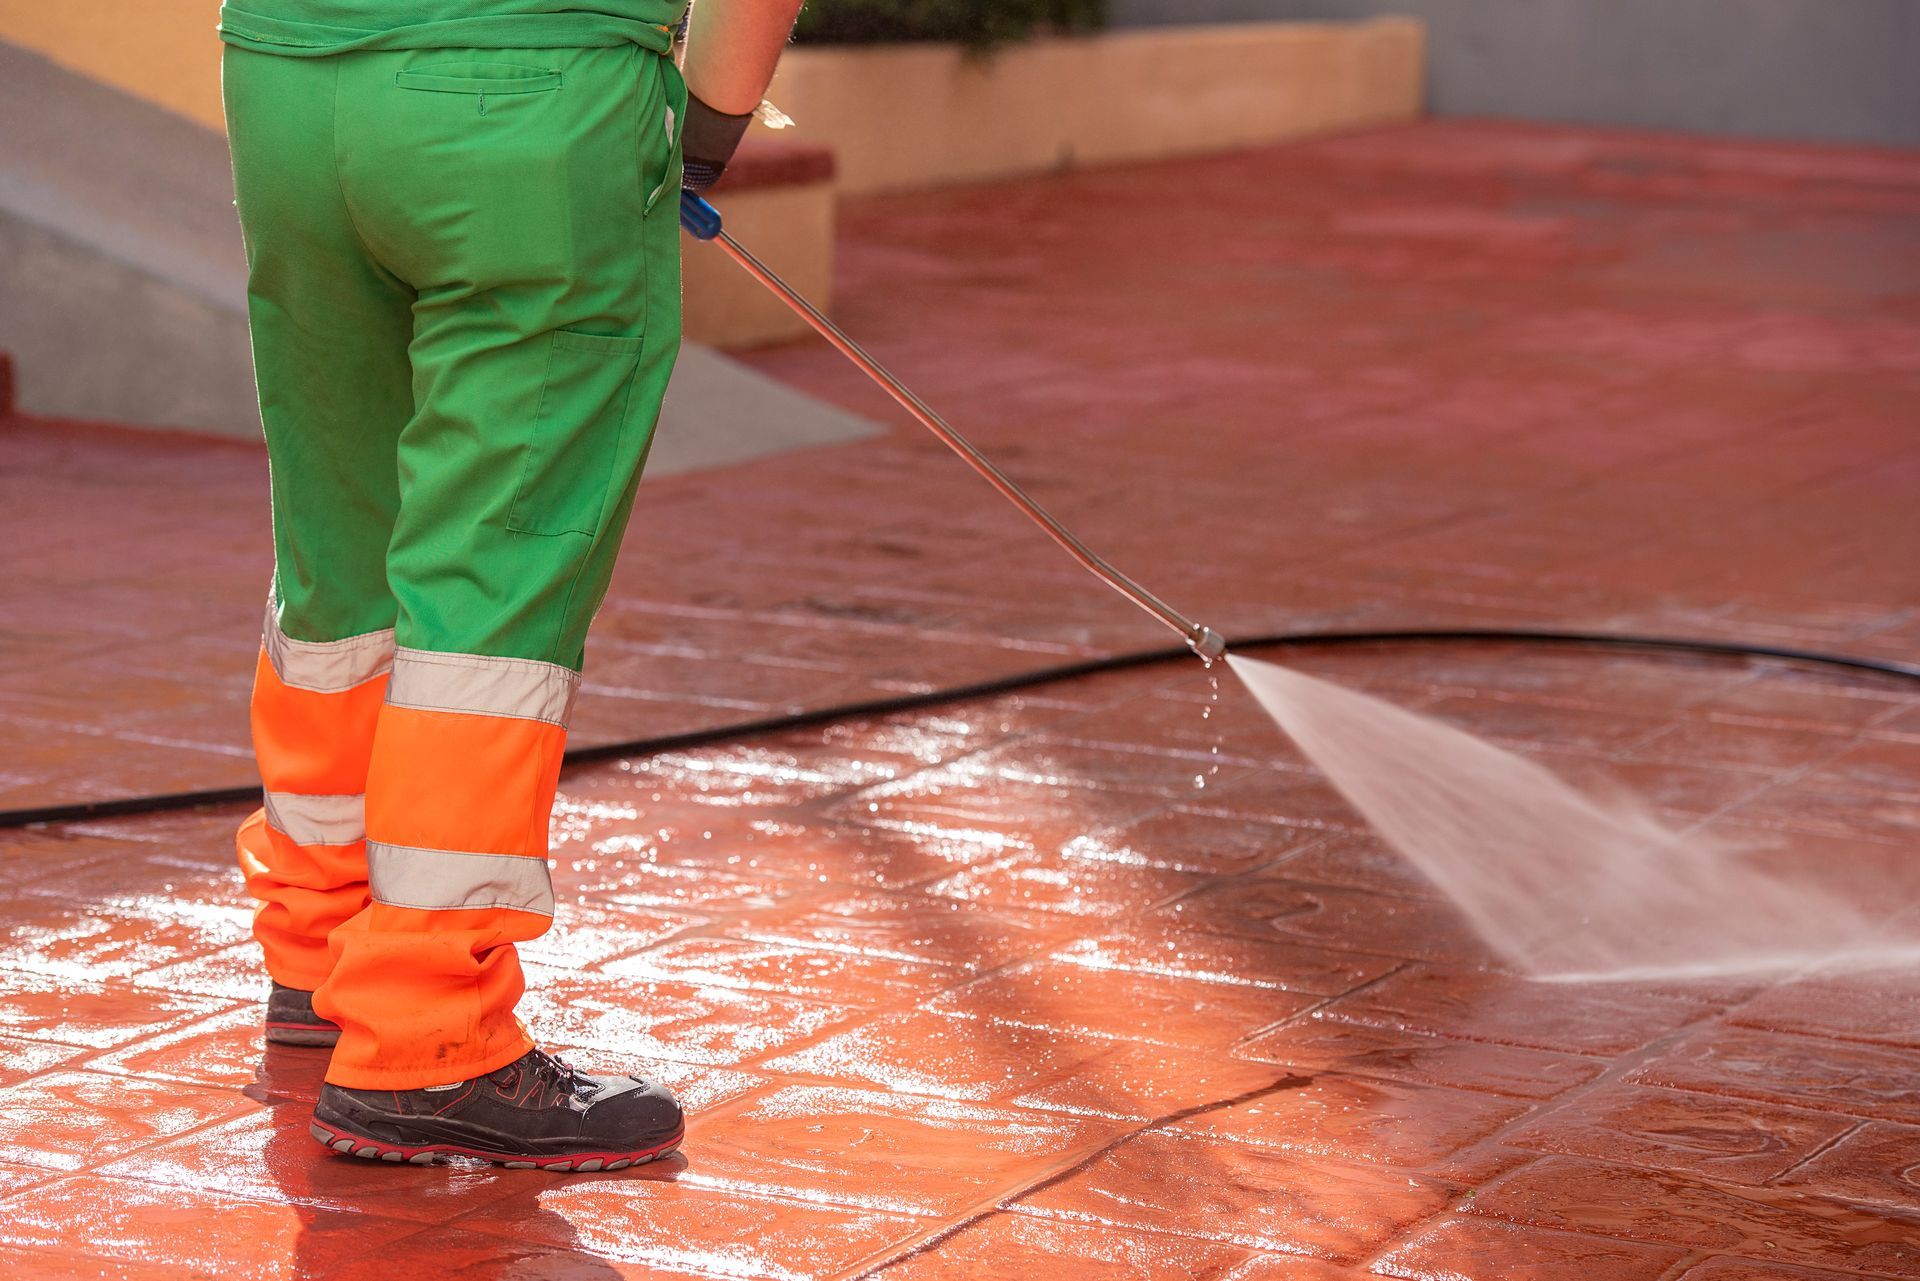 a man in green and orange pants is using a high pressure hose